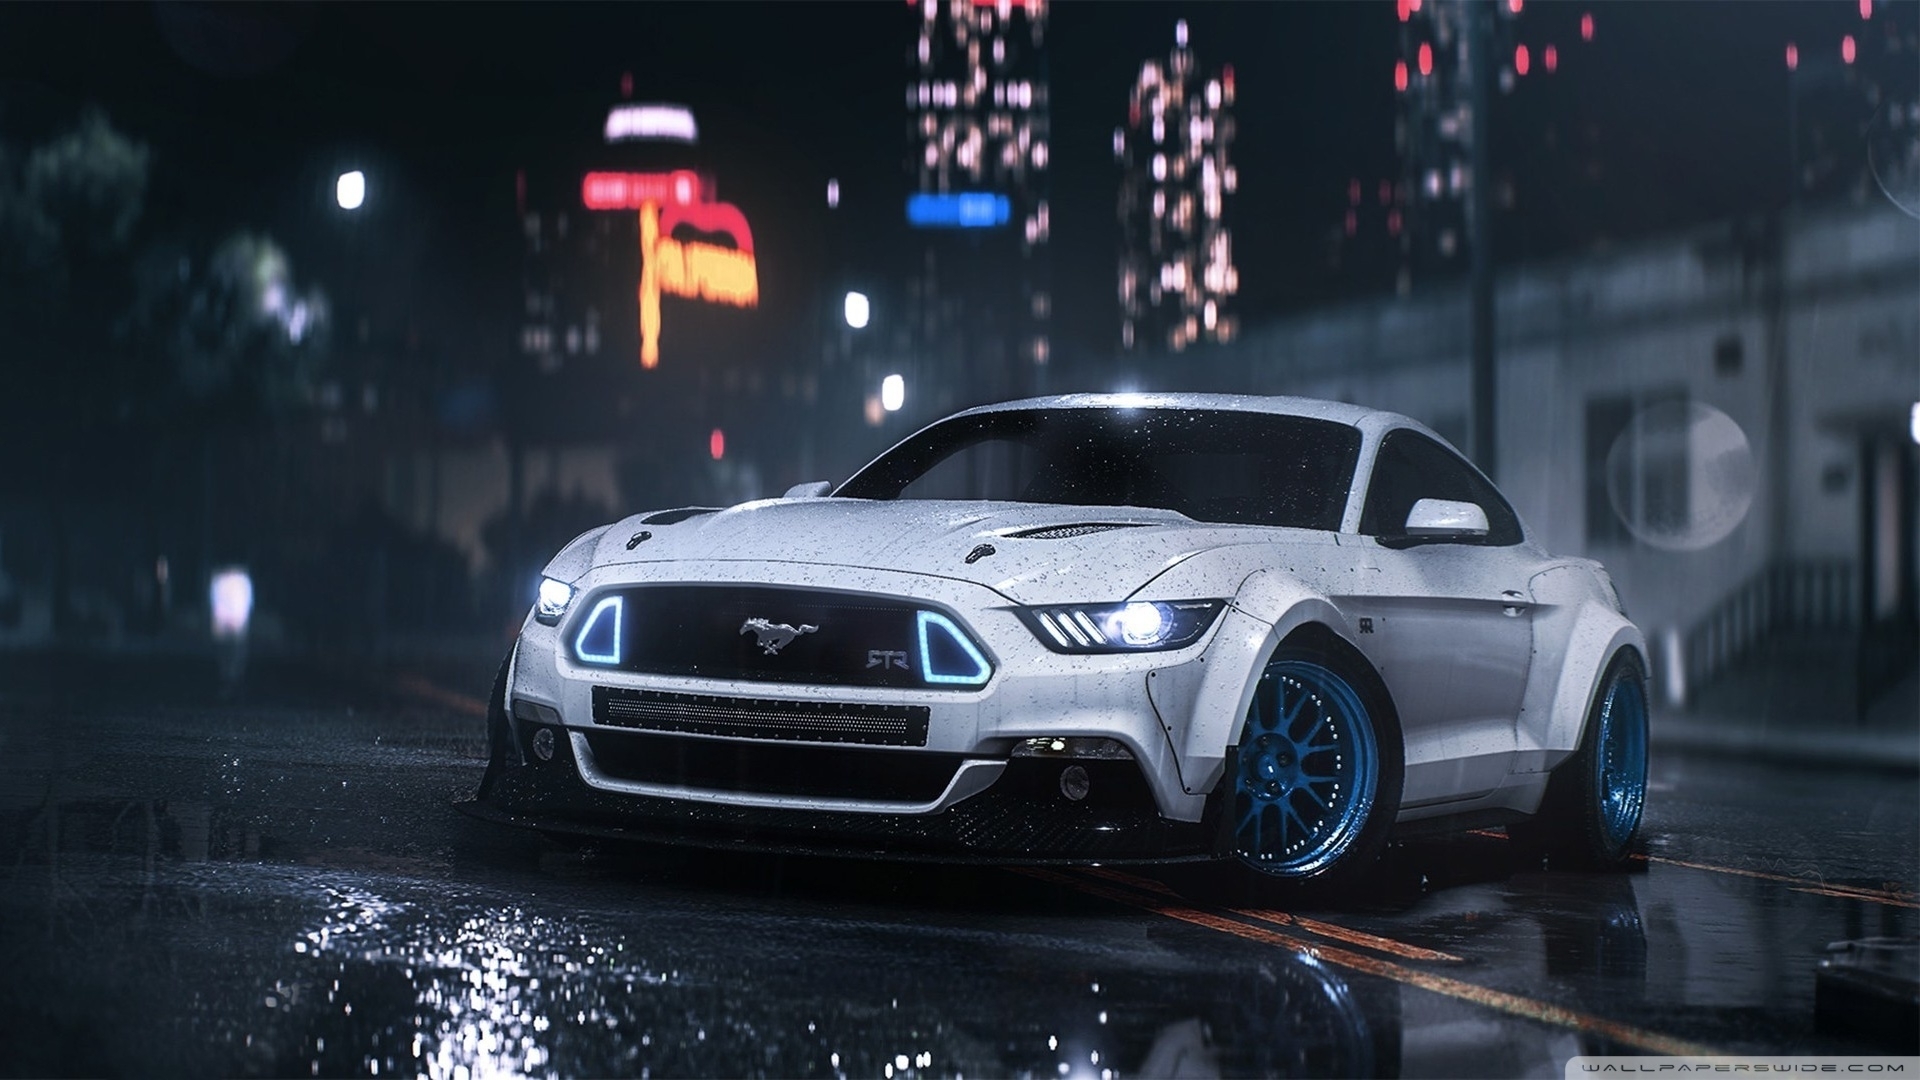 10 New Ford Mustang Hd Wallpapers 1080P FULL HD 1080p For PC Desktop